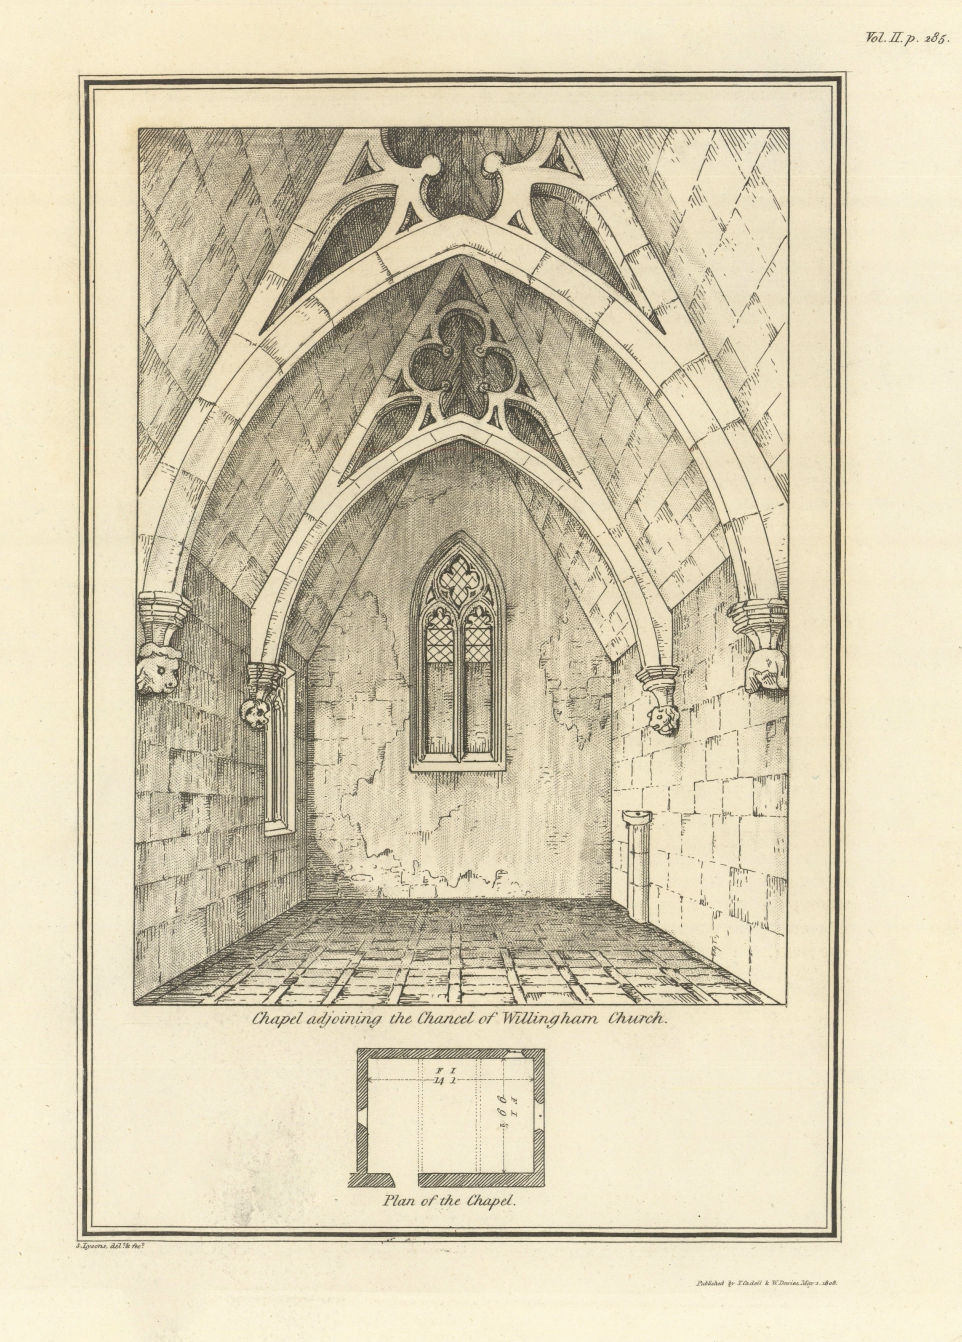 Chapel adjoining the Chancel of Willingham Church. LYSONS 1810 old print